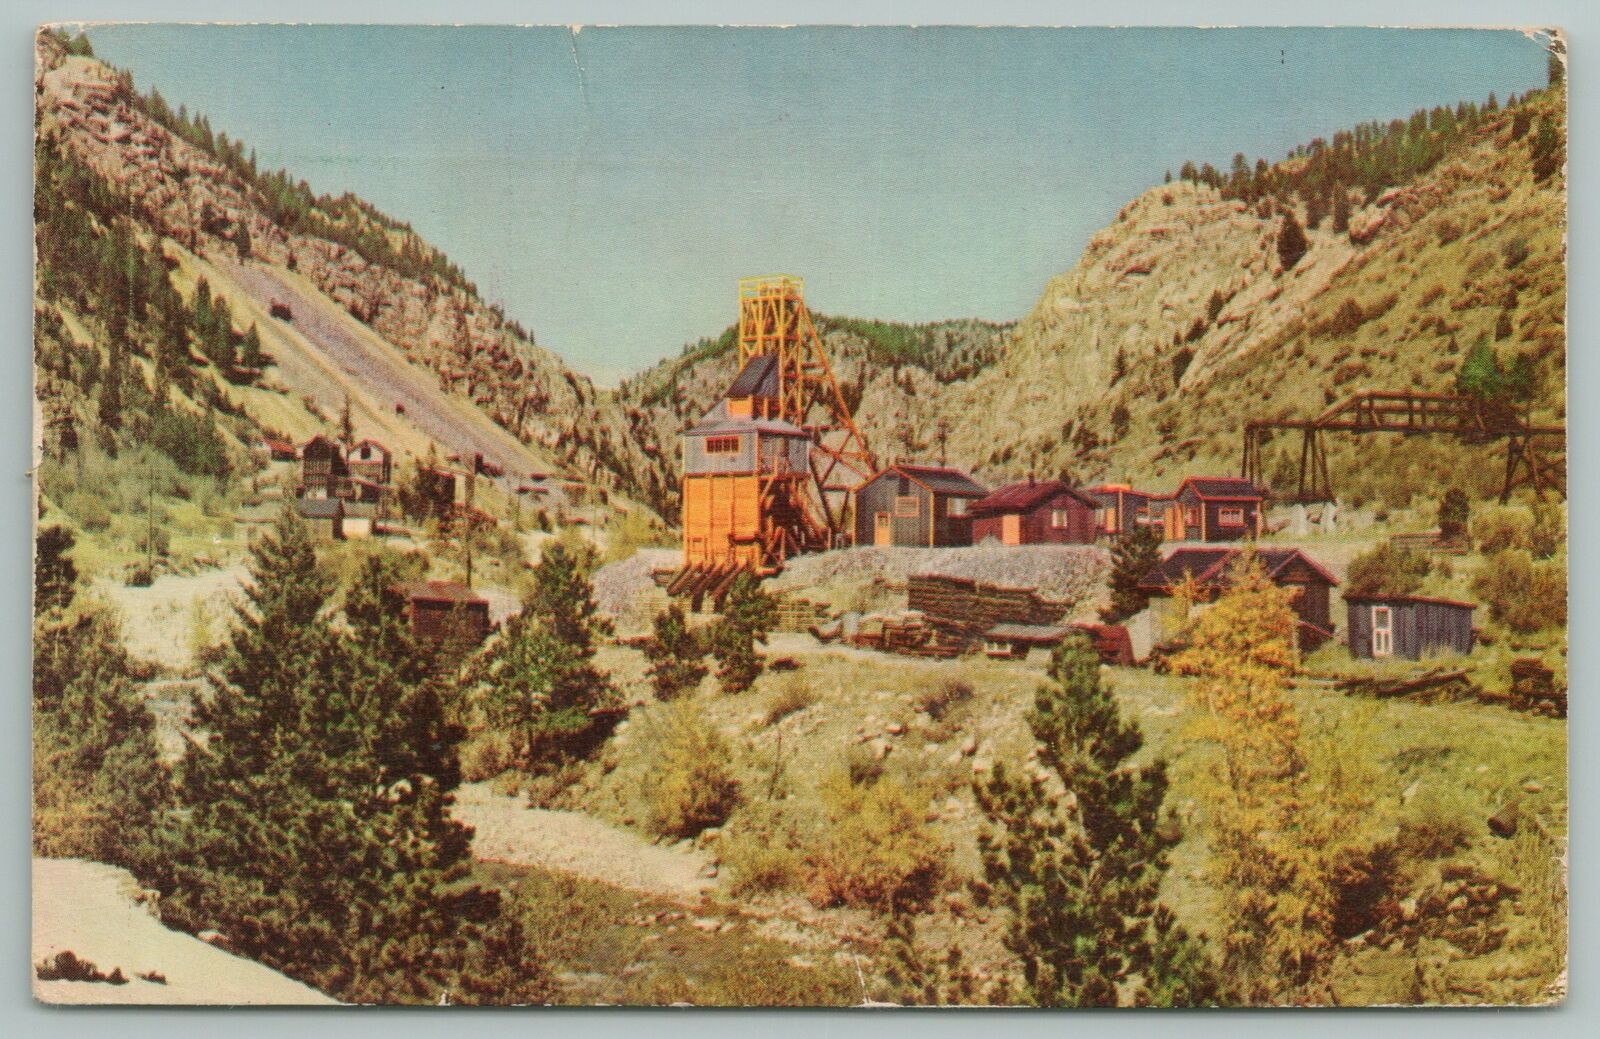 Utah~gold Mining View Of Gold Mine Bldgs From Afar~vintage Postcard